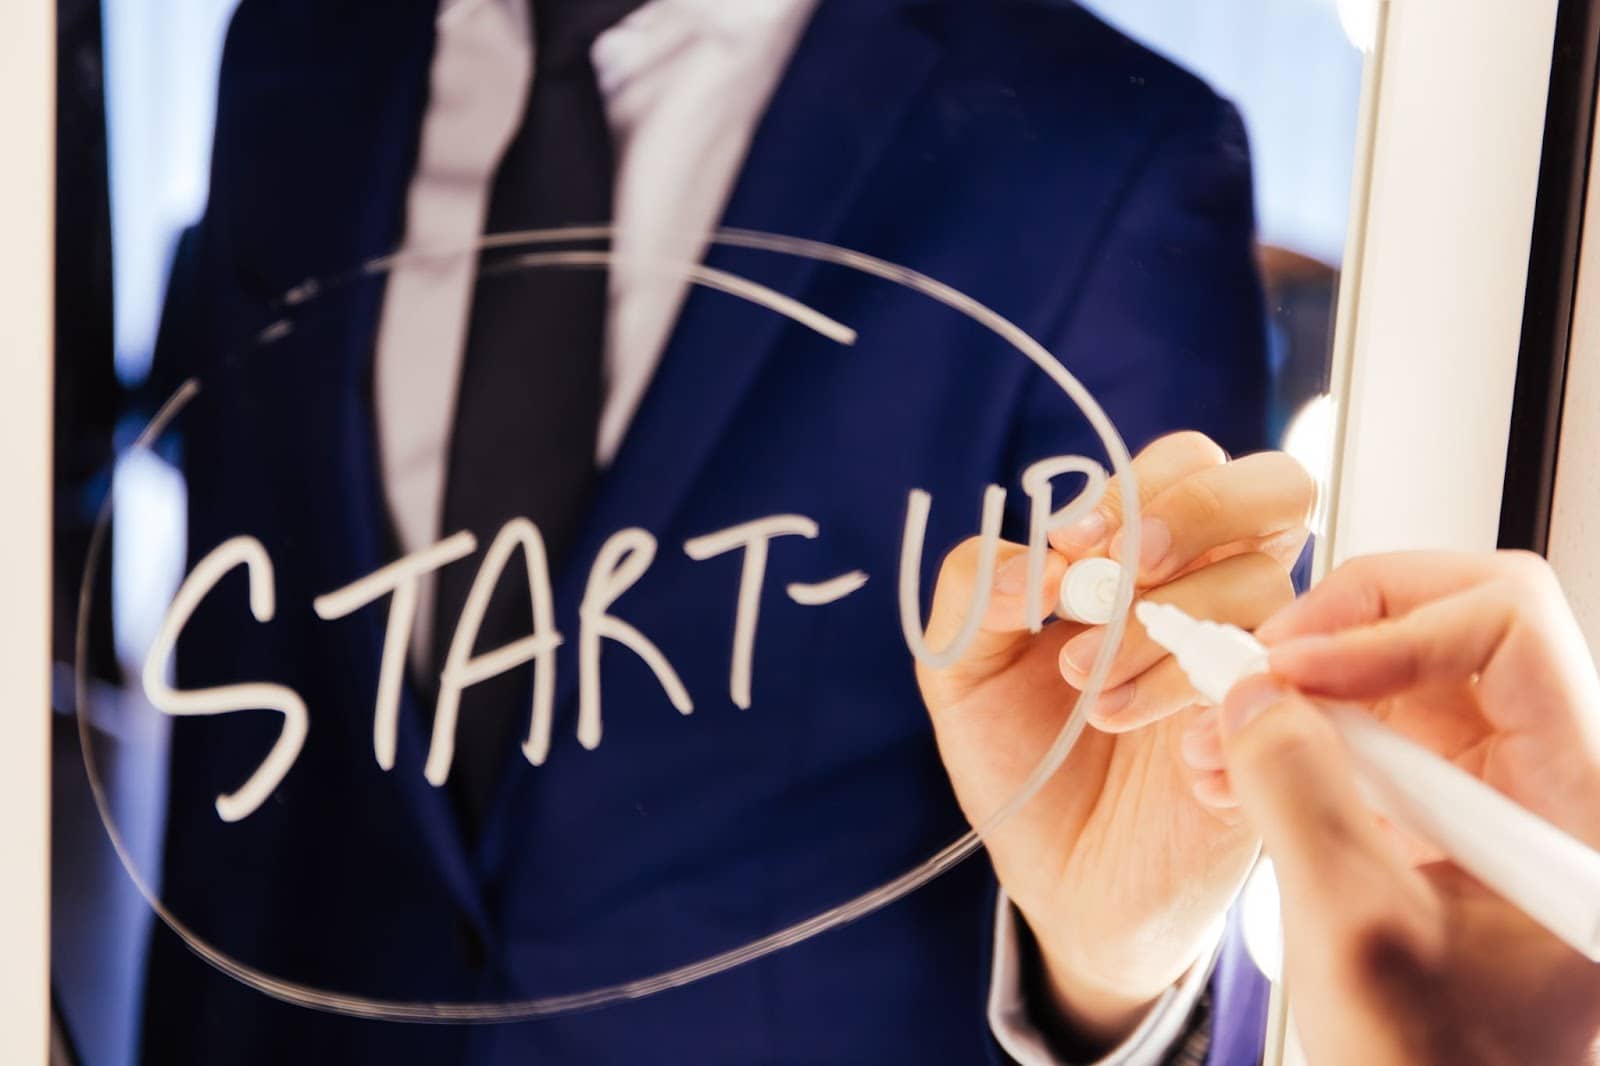 Start-ups & lead generation | A match made in heaven!